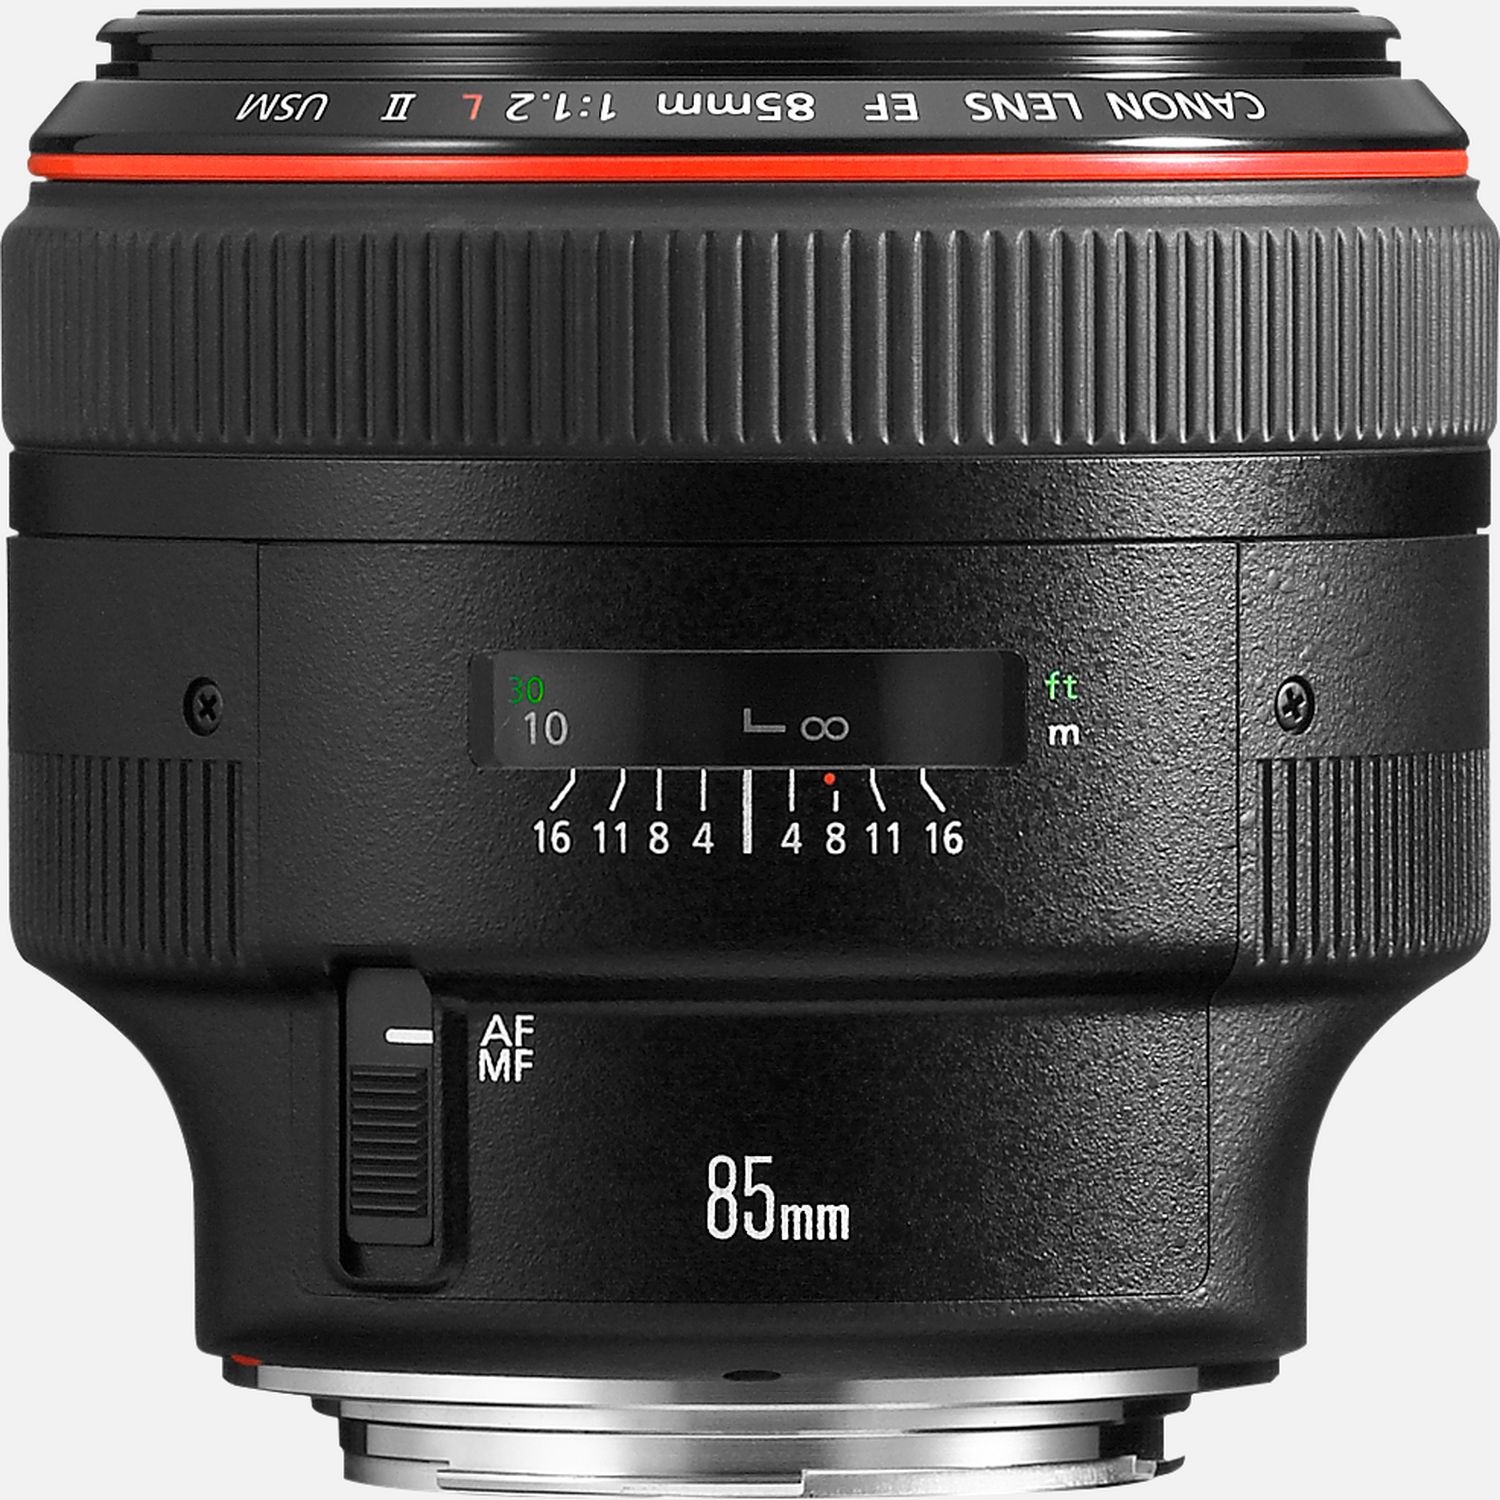 Canon EF 85mm f/1.2L II USM Lens in Discontinued at Canon